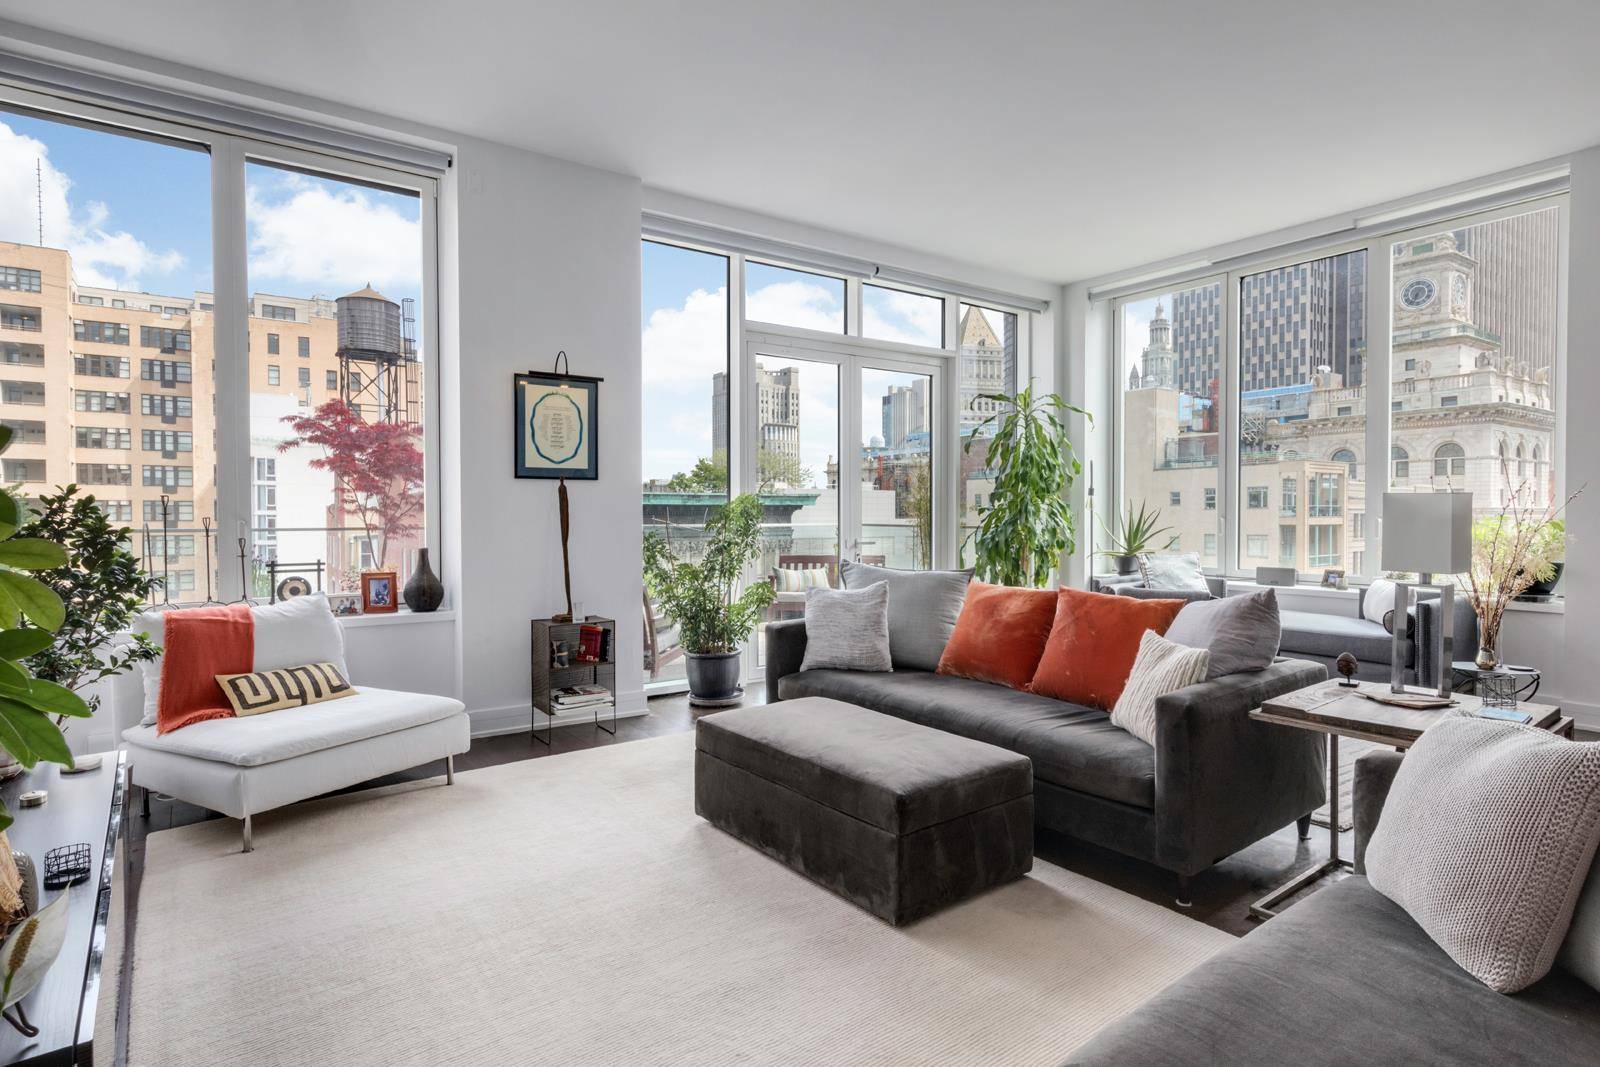 Luxuriate in urban living within this sun soaked 3 bedroom, 2.